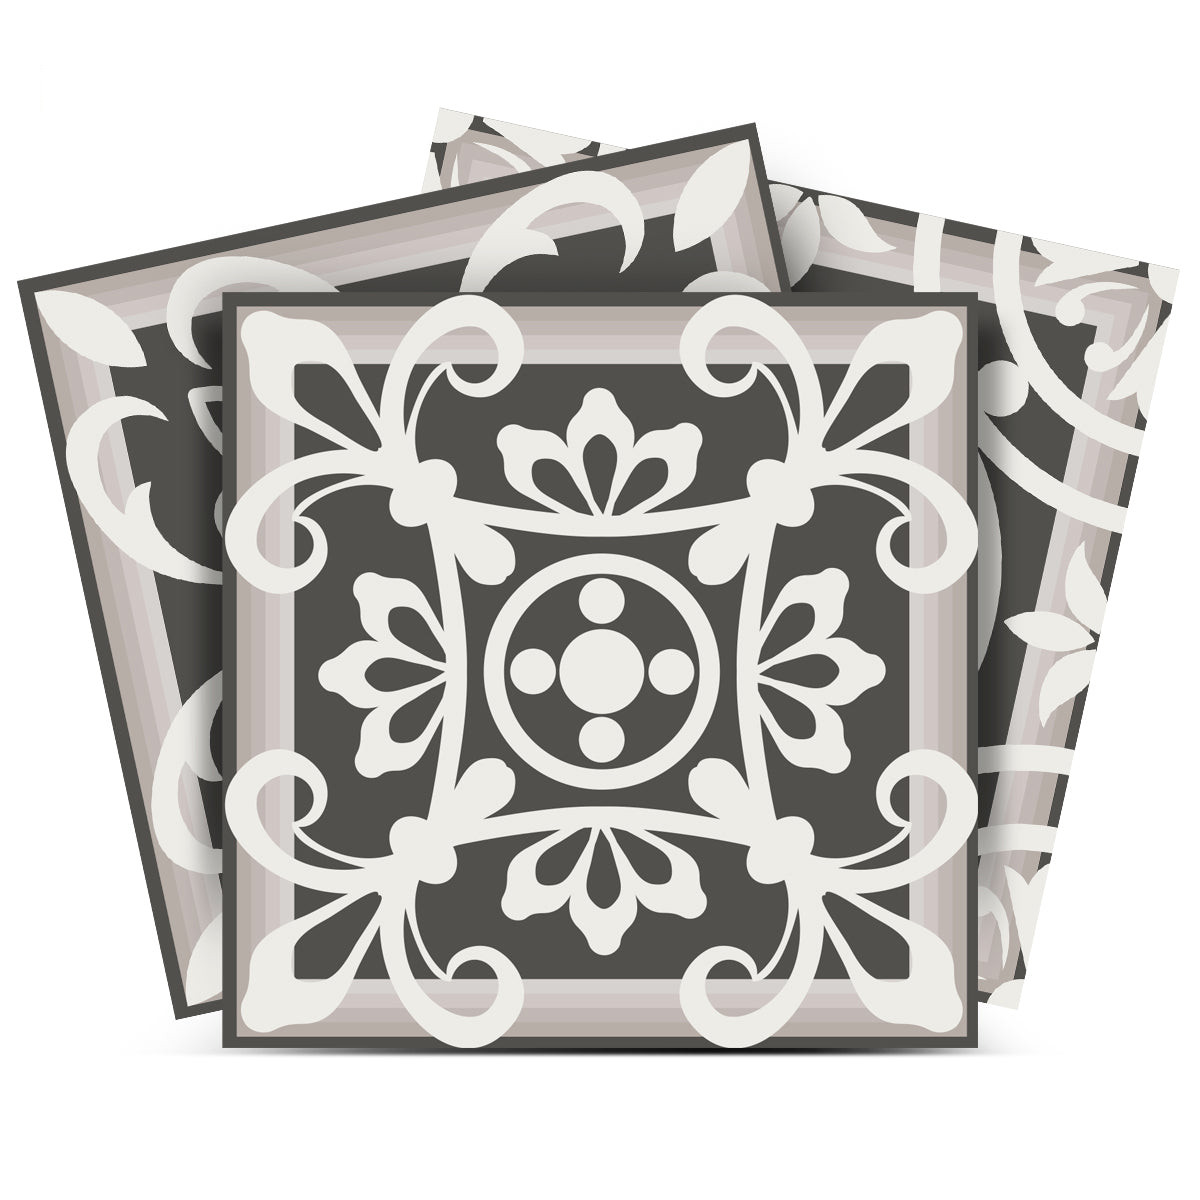 5" x 5" Wood Brown and White Mosaic Peel and Stick Removable Tiles-400480-1